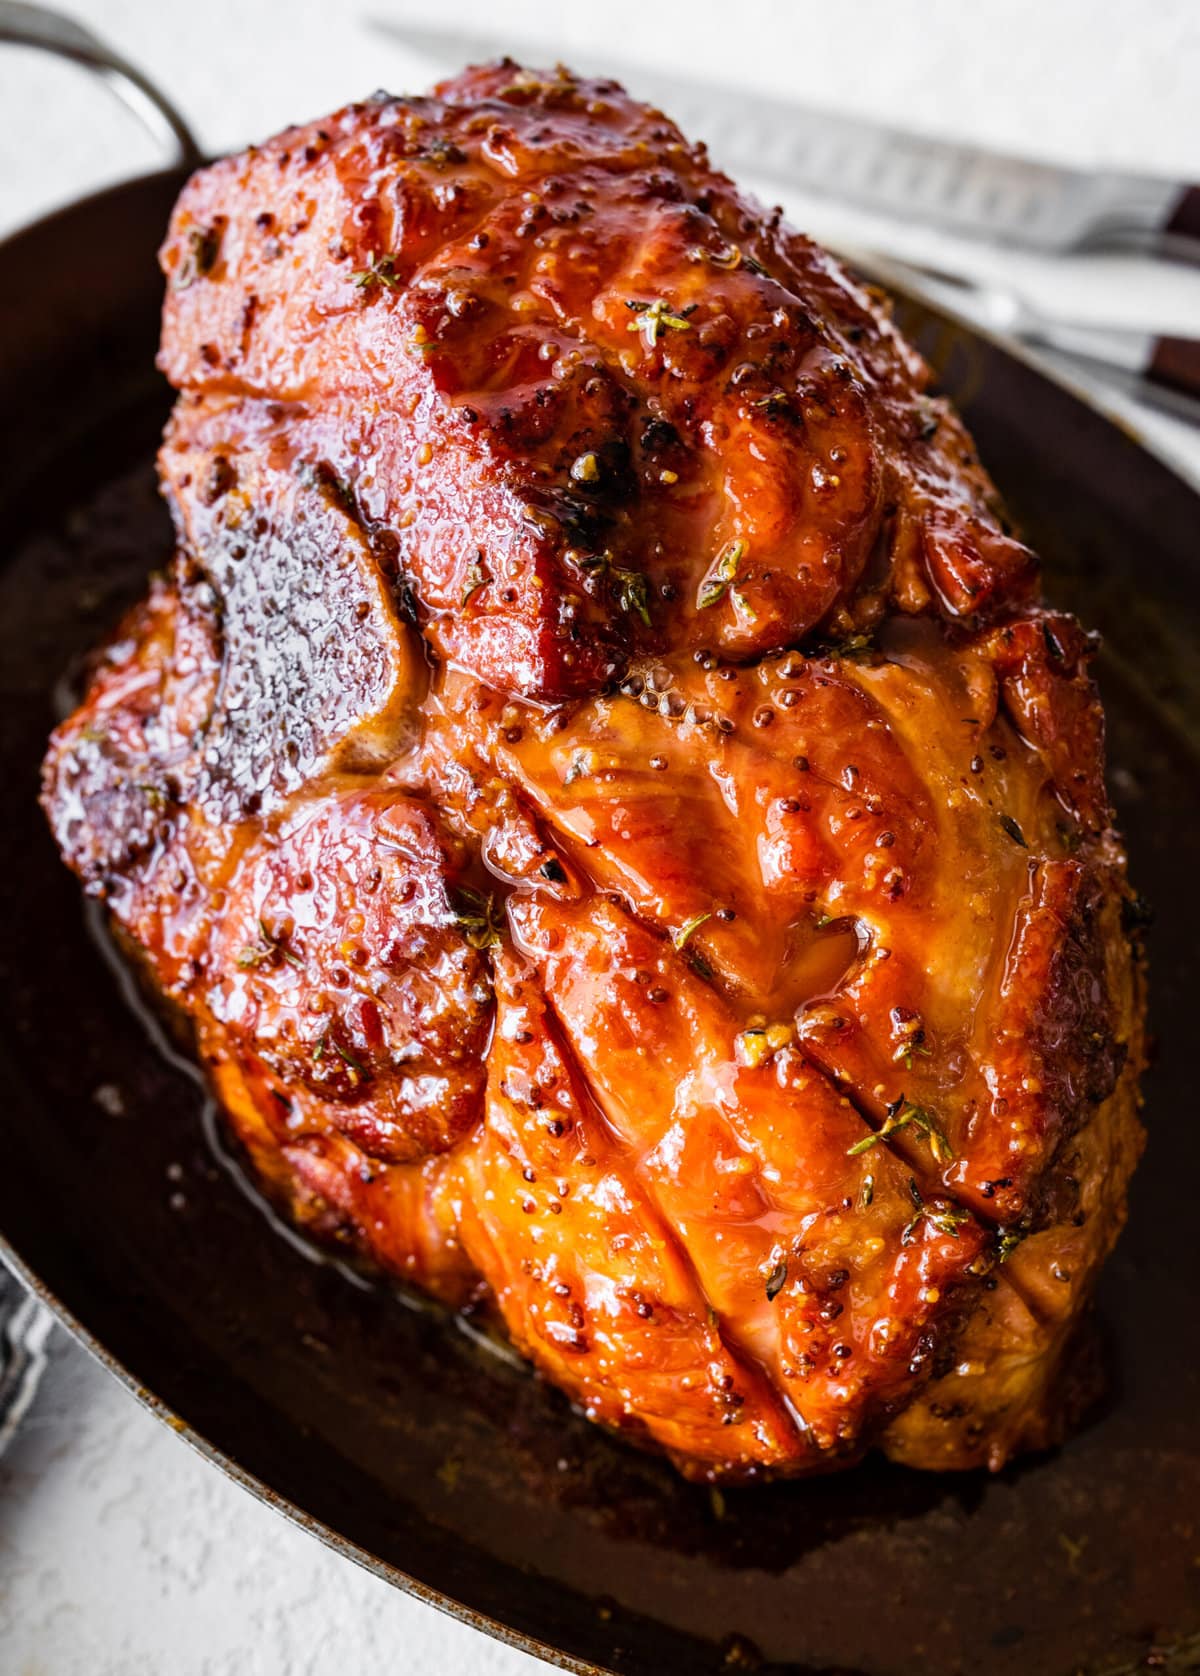 Perfectly baked ham with brown sugar glaze in a large baking dish.